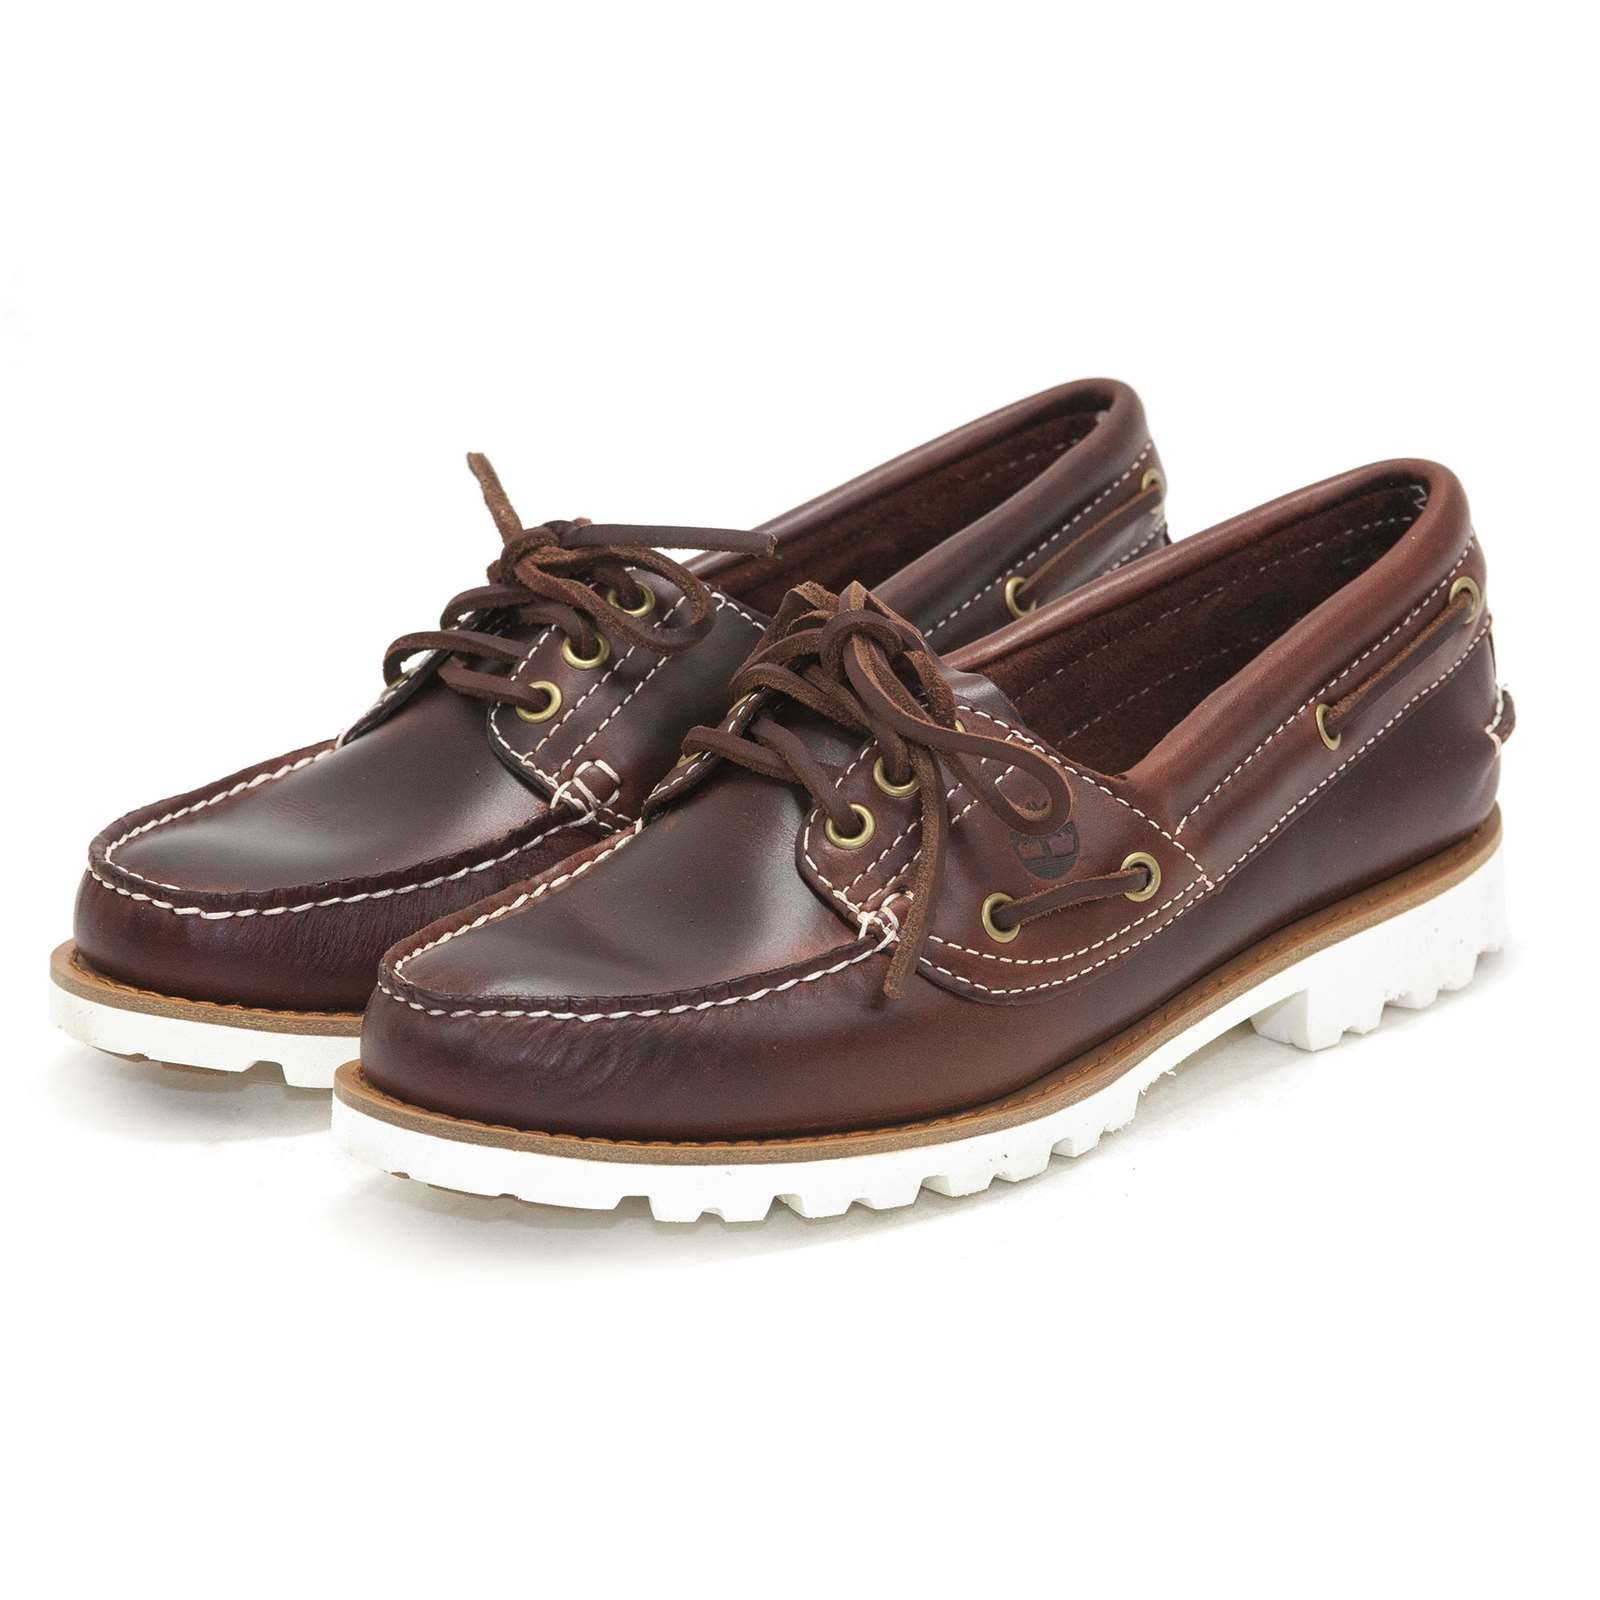 Timberland Women Noreen Boat Shoes